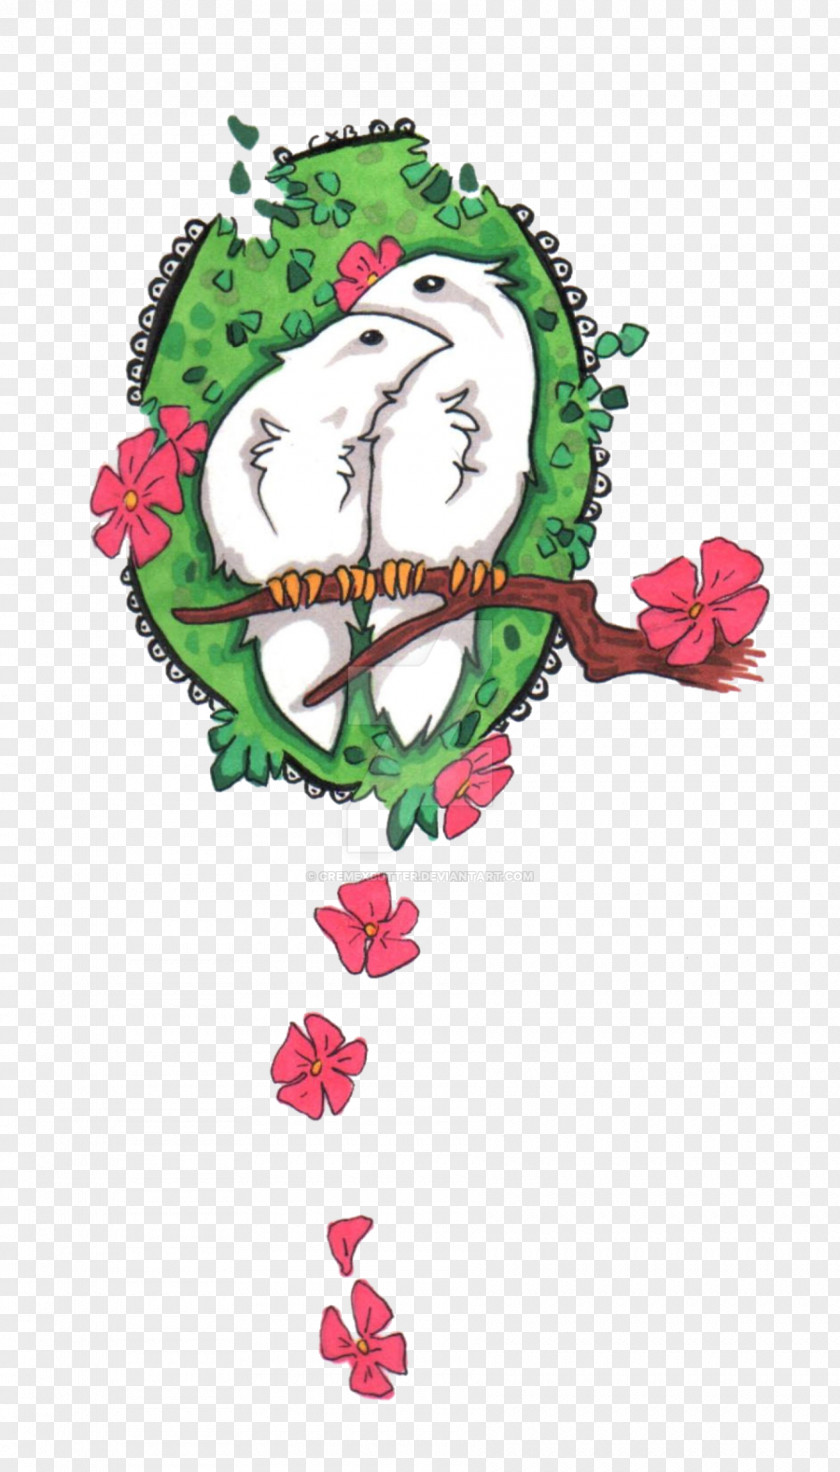 Design Floral Christmas Ornament Character PNG